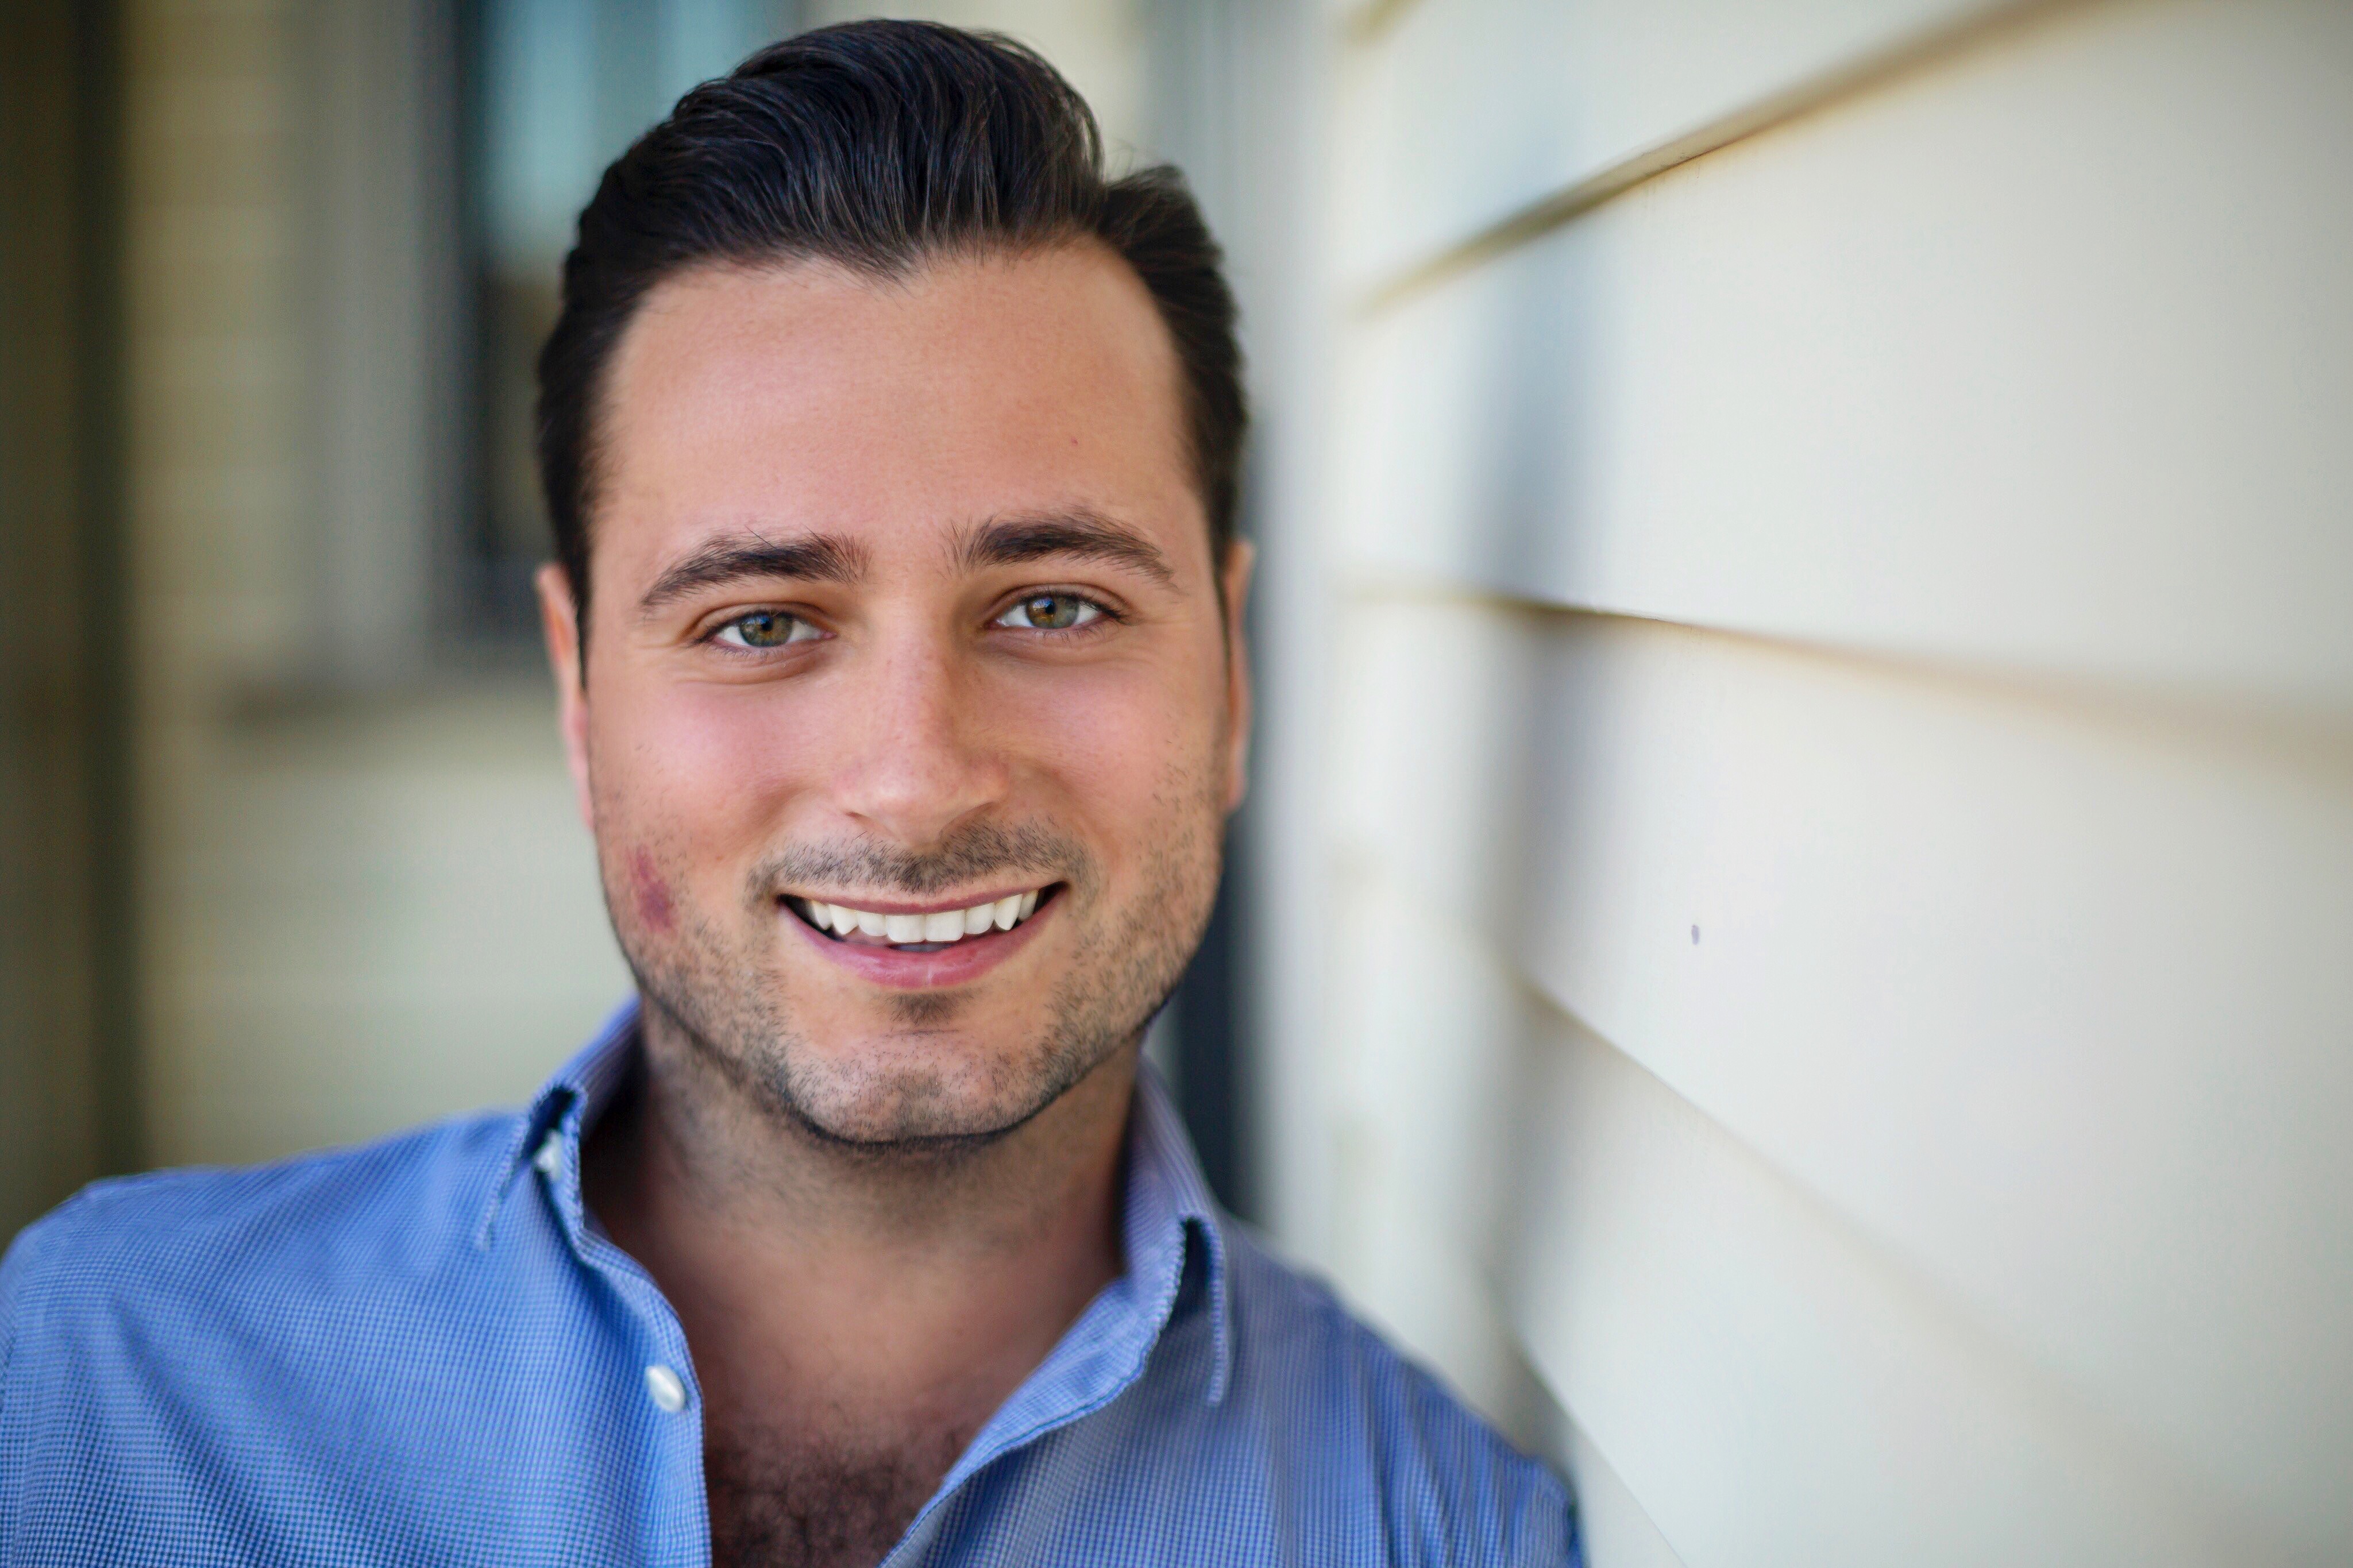 LILA DELMAN REAL ESTATE NAMES RYAN ELSMAN AS DIRECTOR OF MARKETING AND PUBLIC RELATIONS